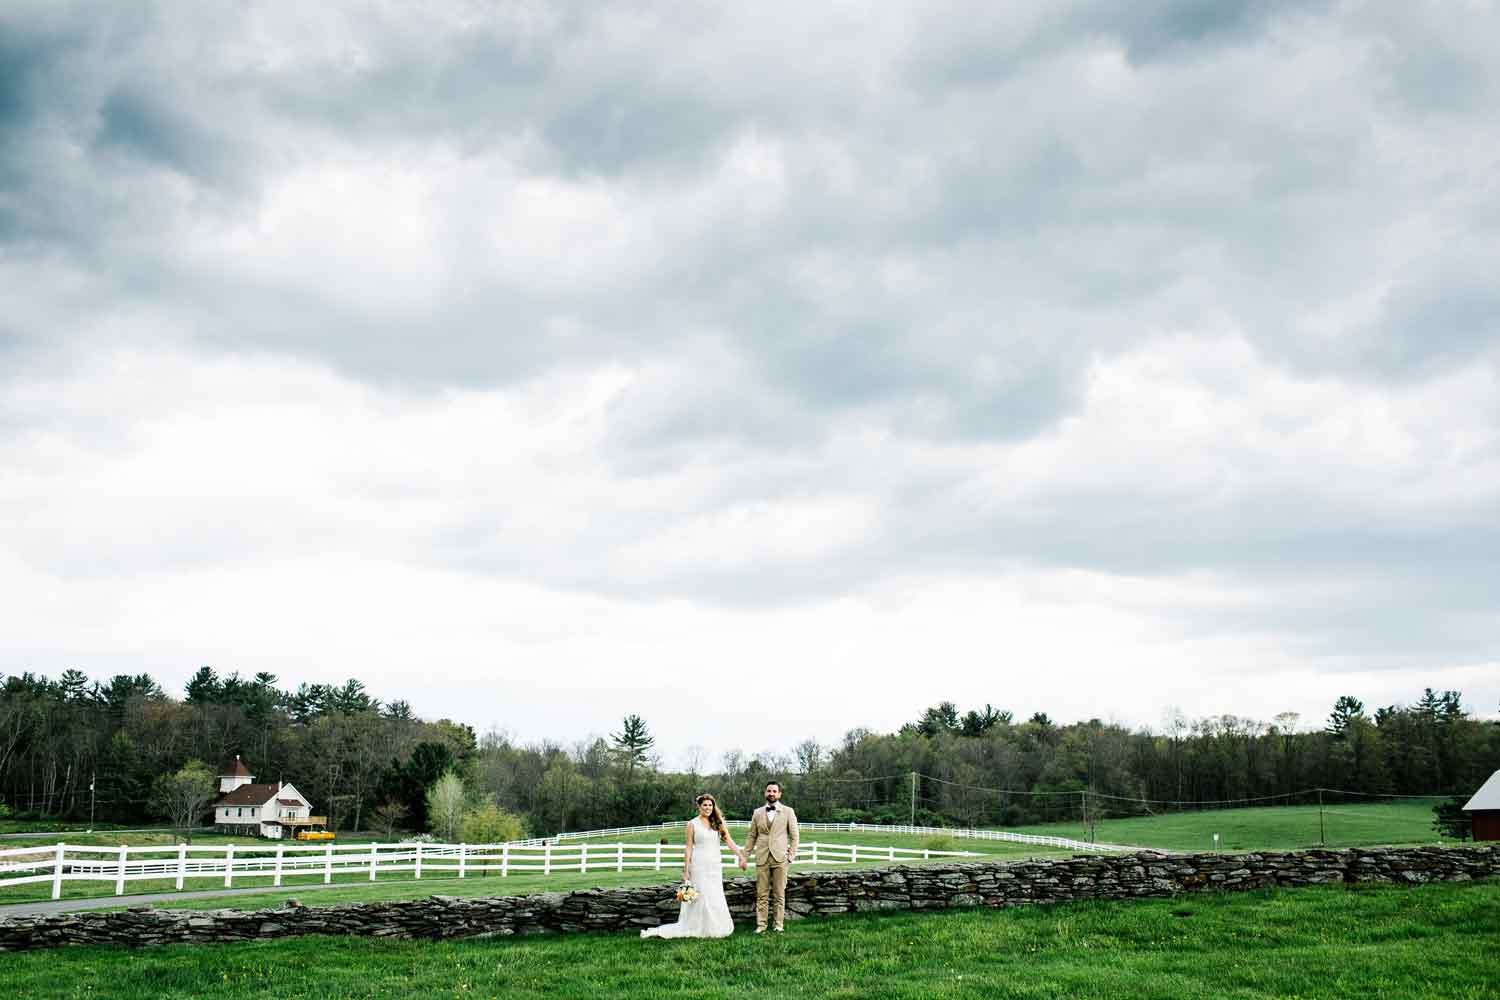 Friedman Farms Wedding with Indoor Ceremony by DPNAK Events, photo by We Laugh We Love